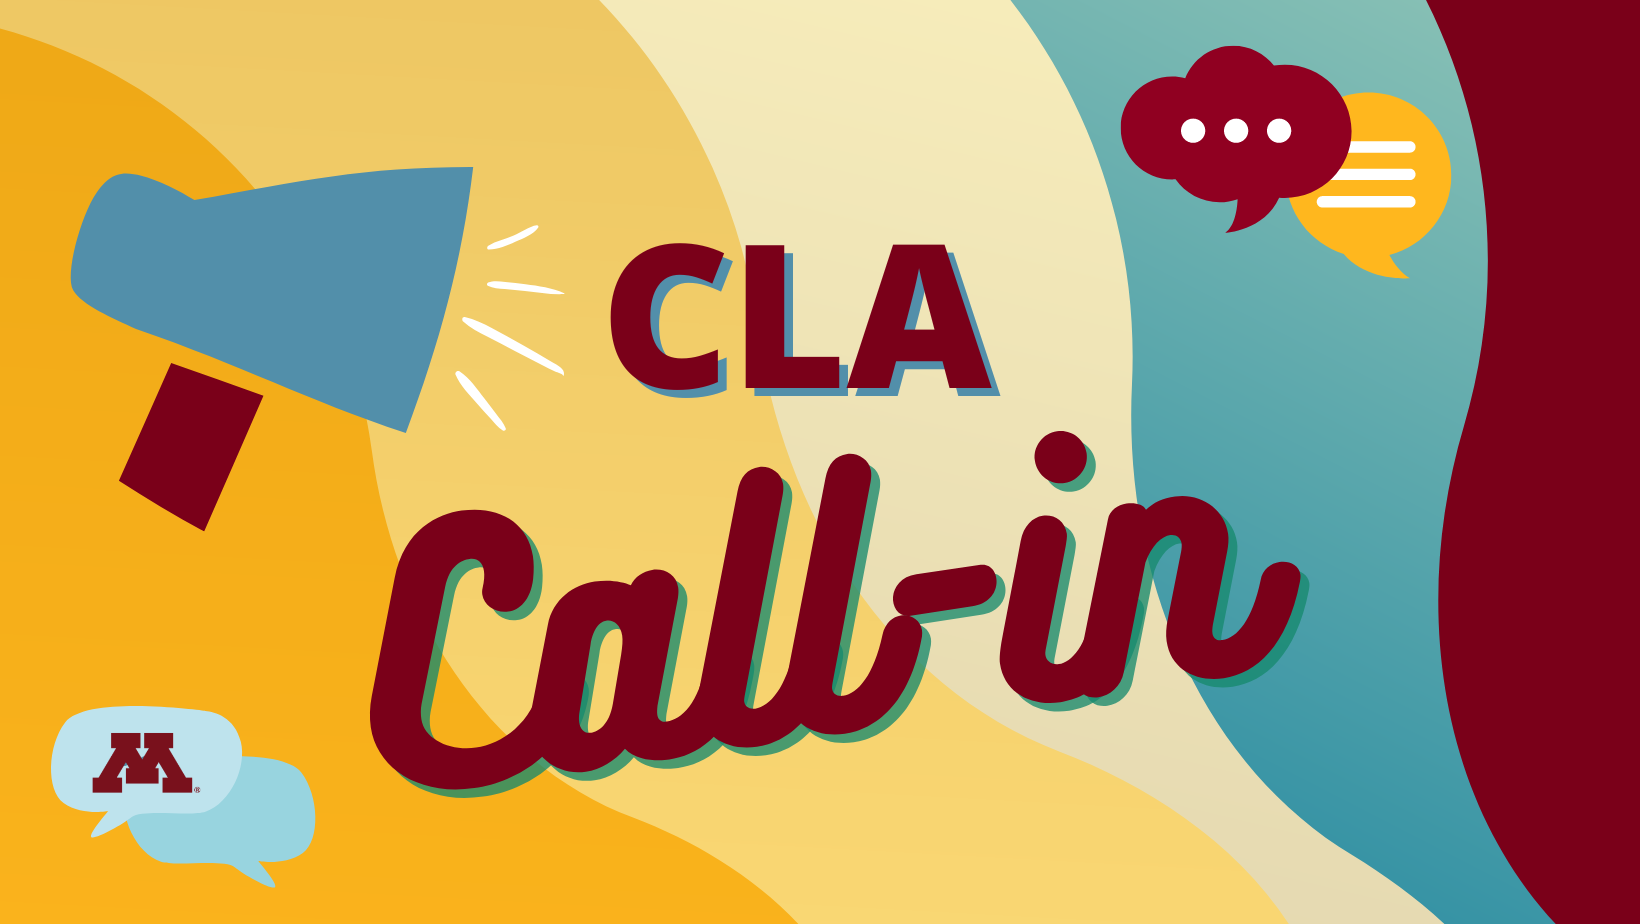 Maroon text spelling "CLA Call-In" on a gold, maroon, and teal patterned background